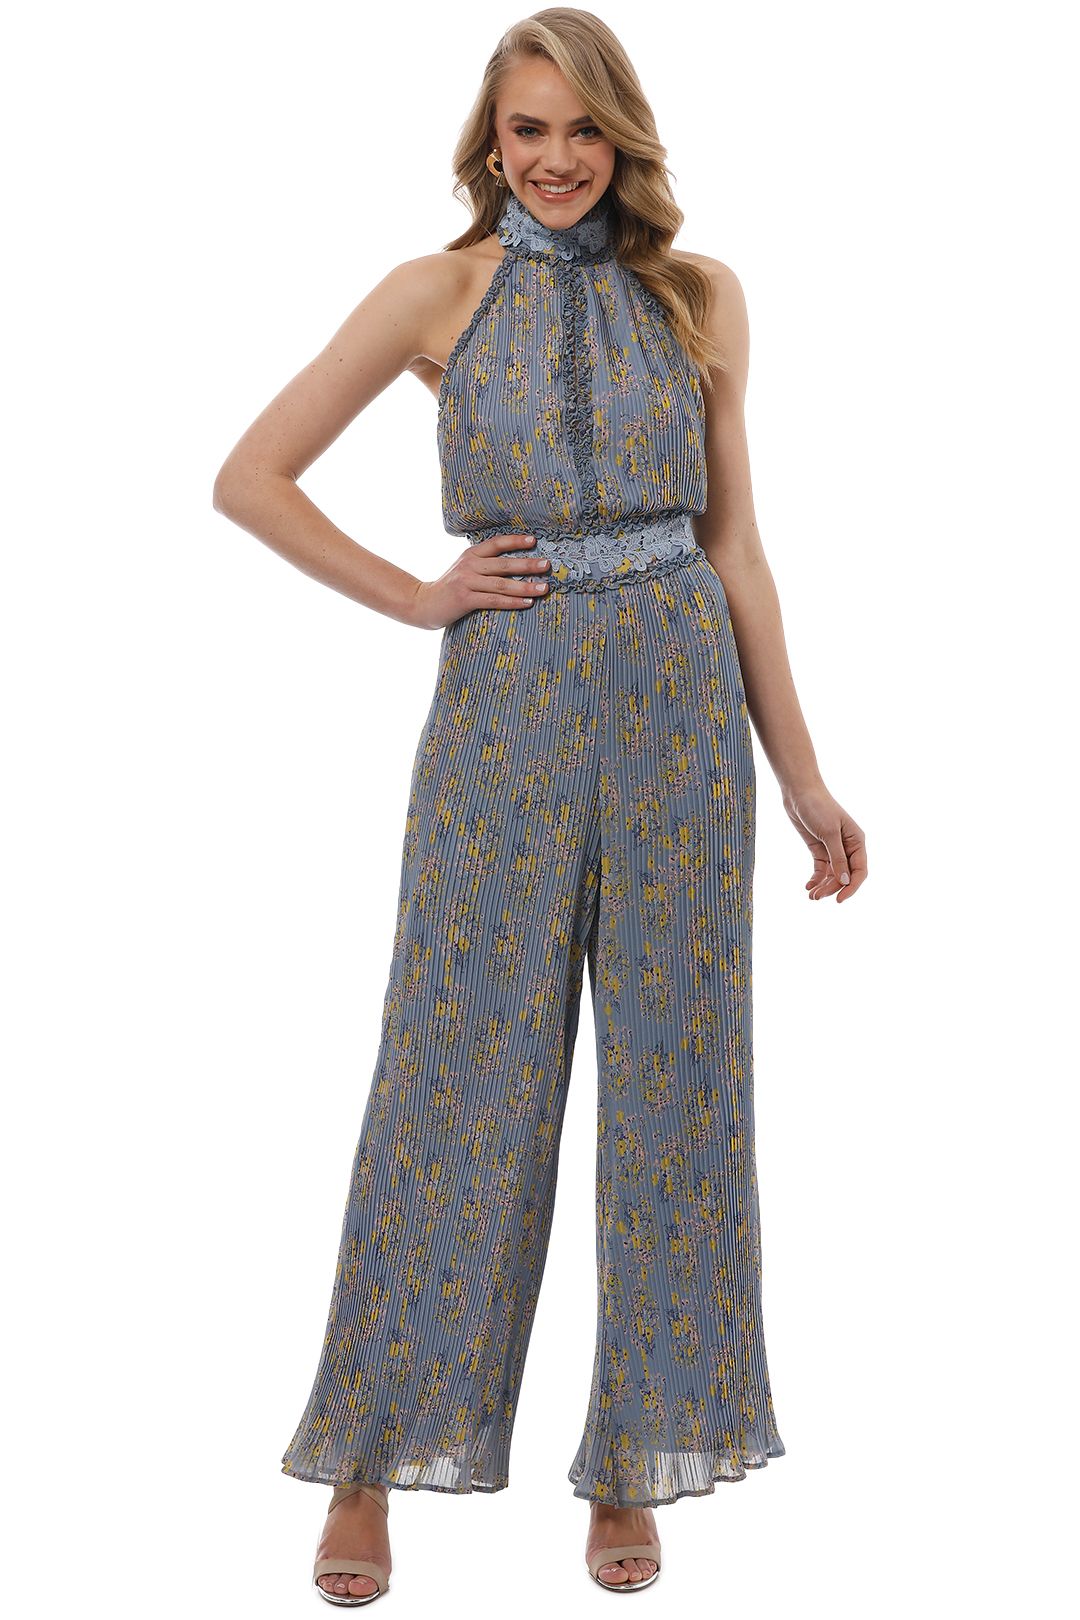 We Are Kindred - Helena Pleated Jumpsuit - Blue Floral - Front